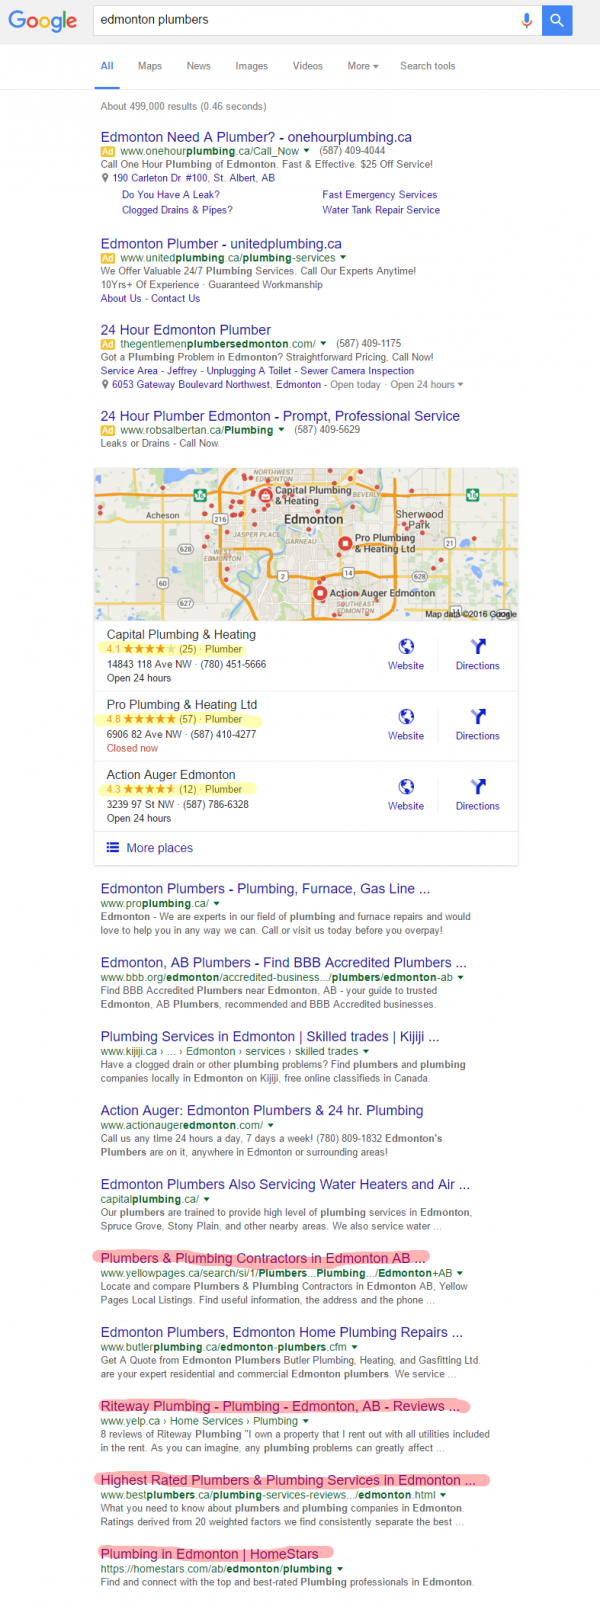 How reviews show in Google listings